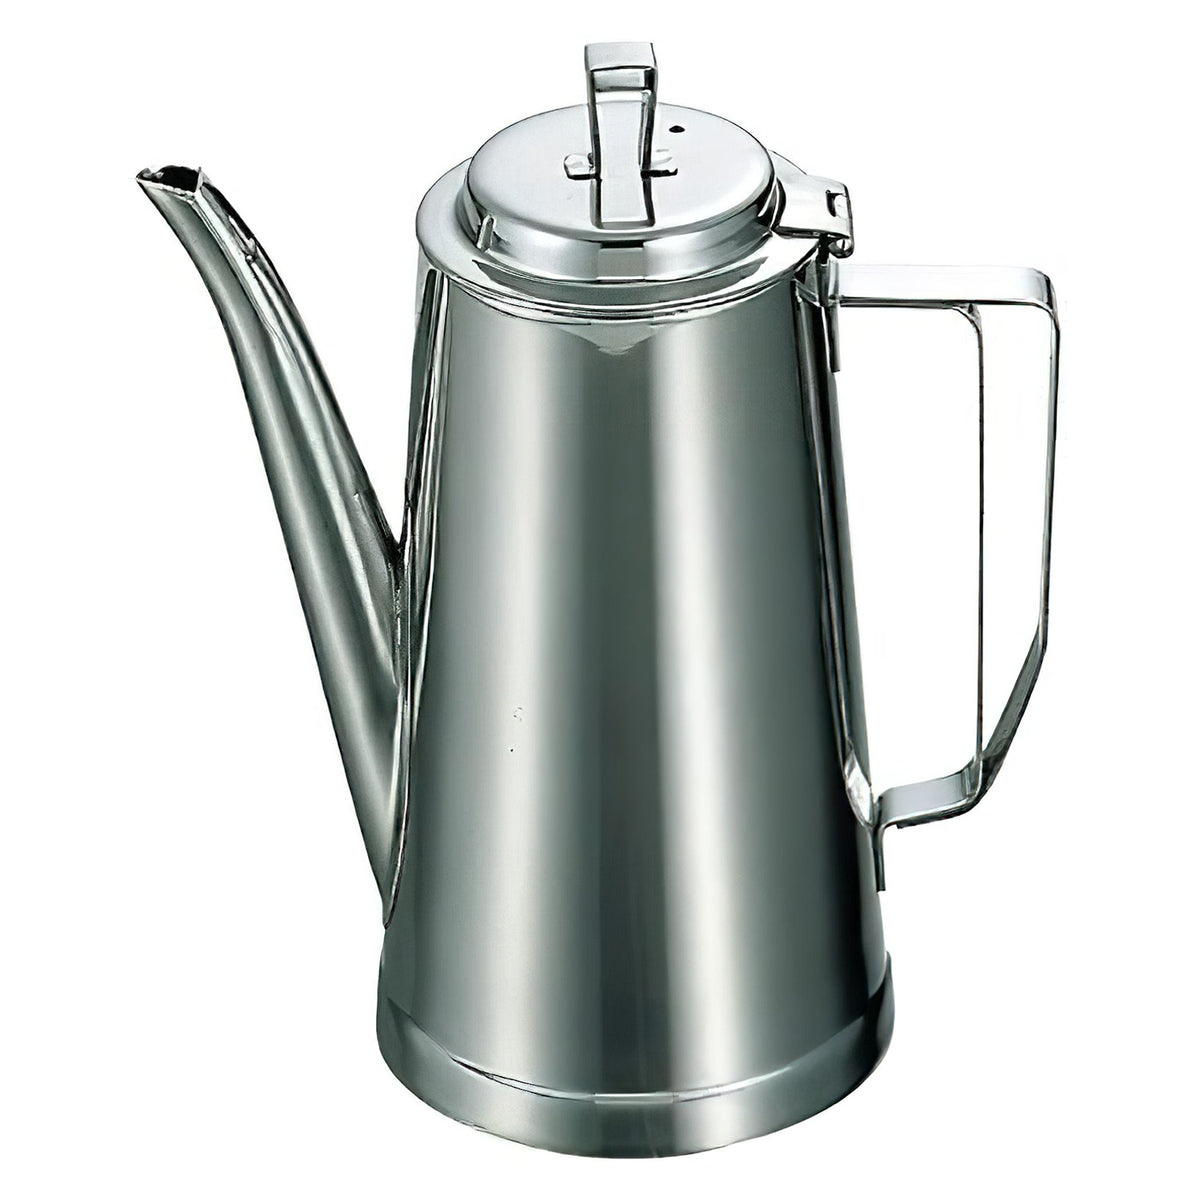 Sampo Sangyo Stainless Steel Water Pitcher 1.8L